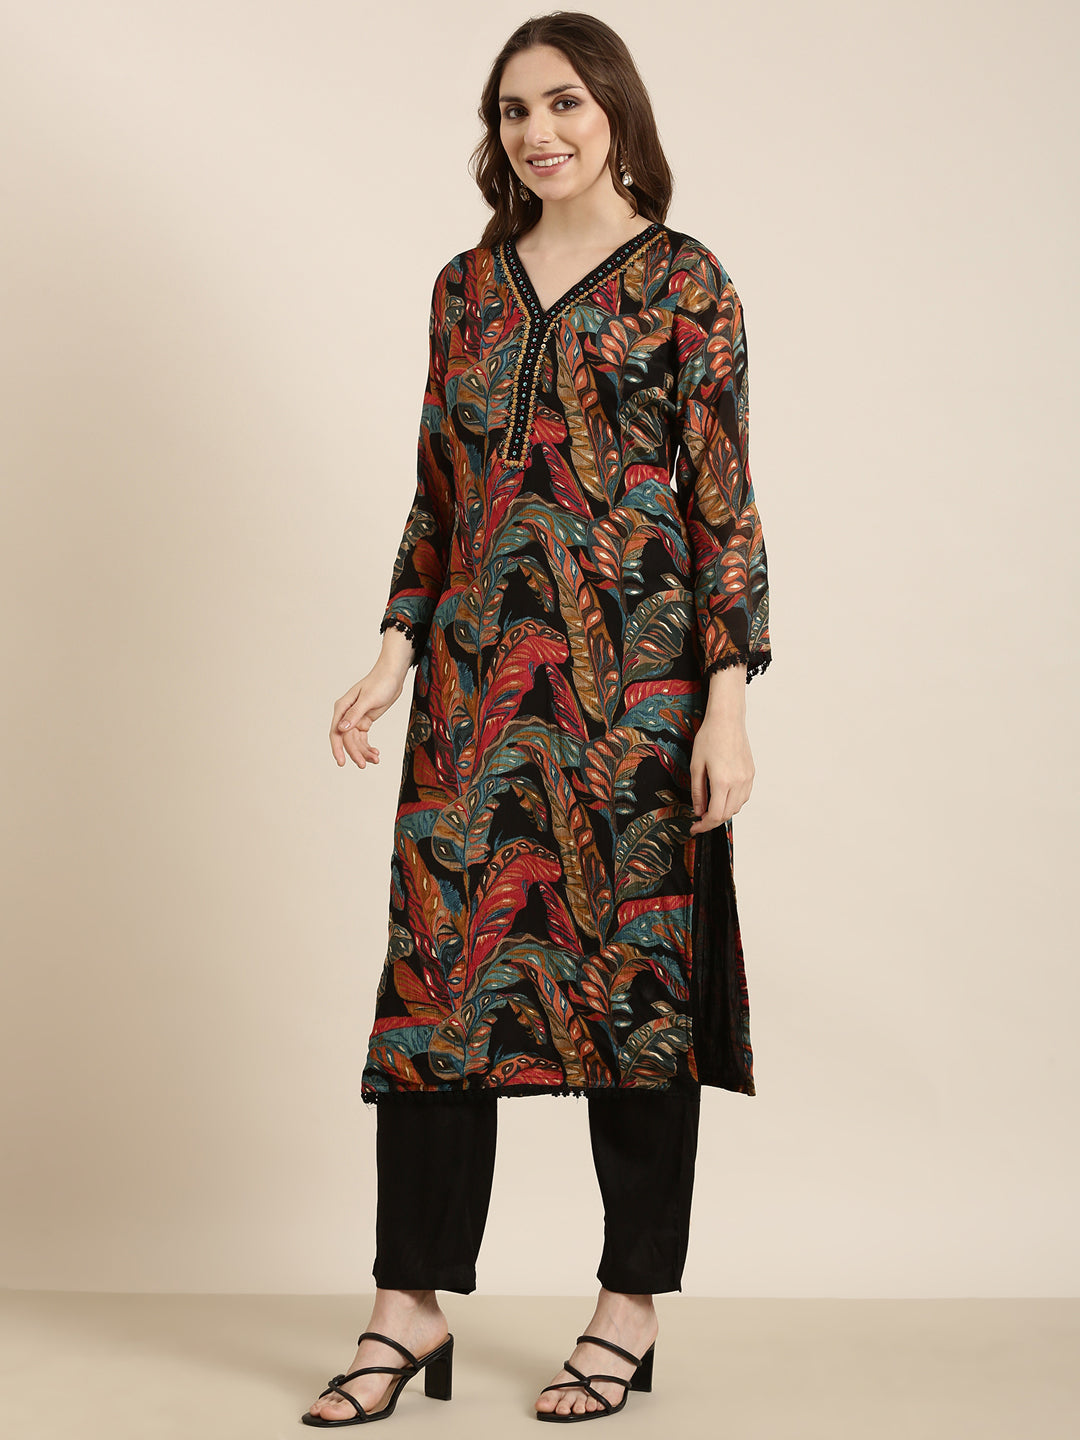 Women Straight Black Floral Kurta and Trousers Set Comes With Dupatta